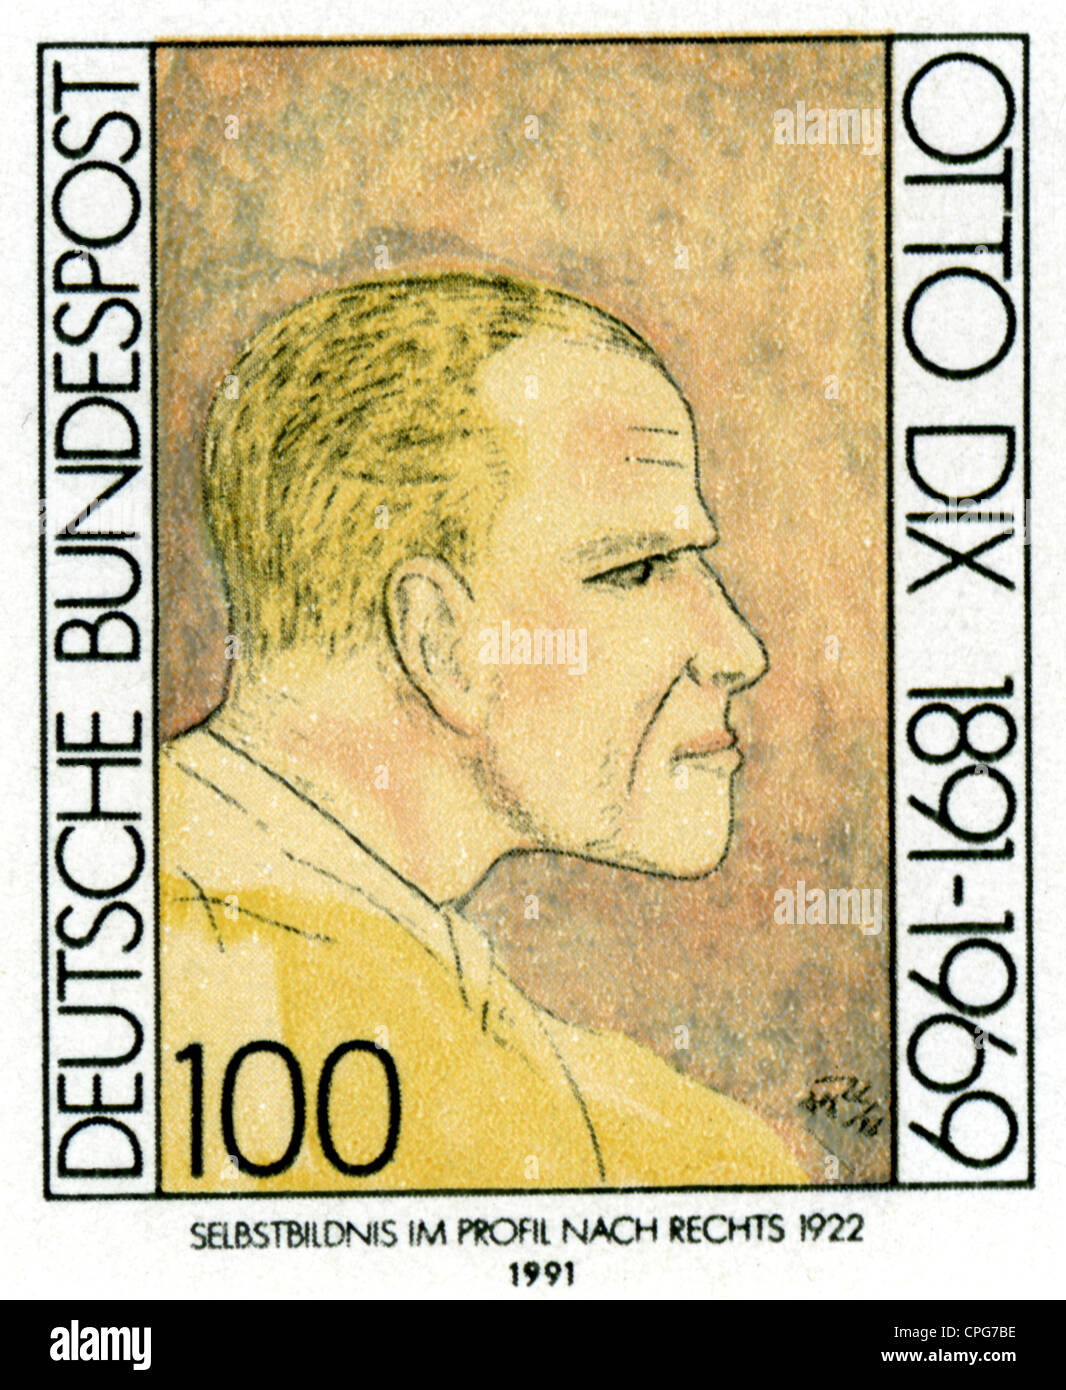 Dix, Otto, 2.12.1891 - 25.7.69, German artist (painter, graphic artist), portrait, stamps and rubber coating, published at 100th birthday, date of issue: 5.11.1991, postage stamps, painted white fluorescent stamp paper DP2, five-colour - Rakel - print, four block, layout: Lutz Lueders, Schoenwalde, out of a postage stamps series, Stock Photo